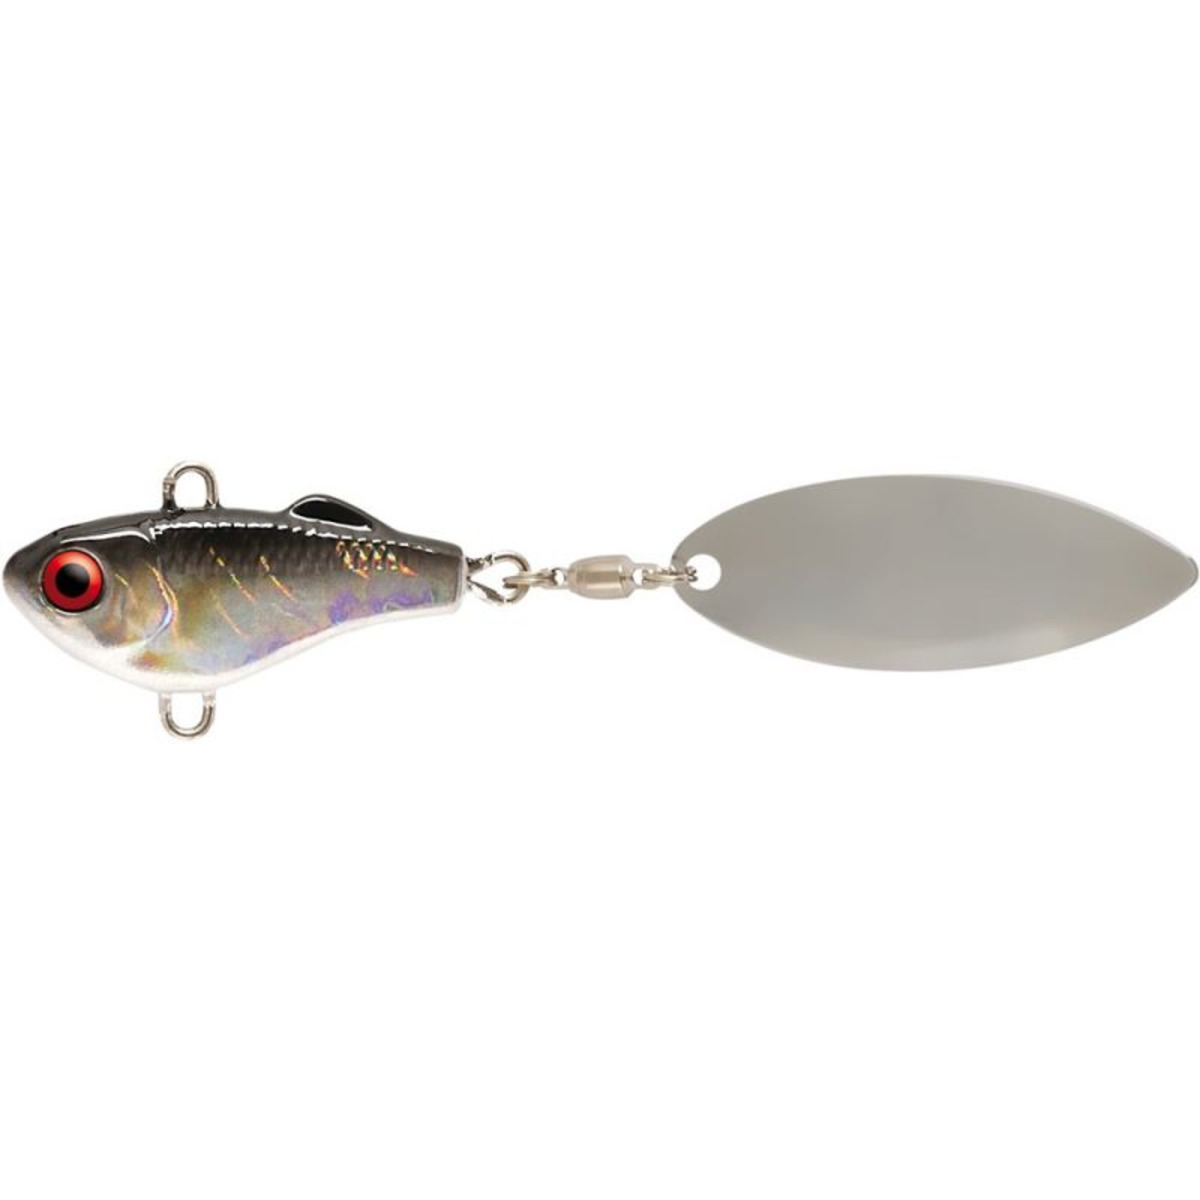 Rapture Asp Spin and Jig - 14.0 g - 33 mm - Silver